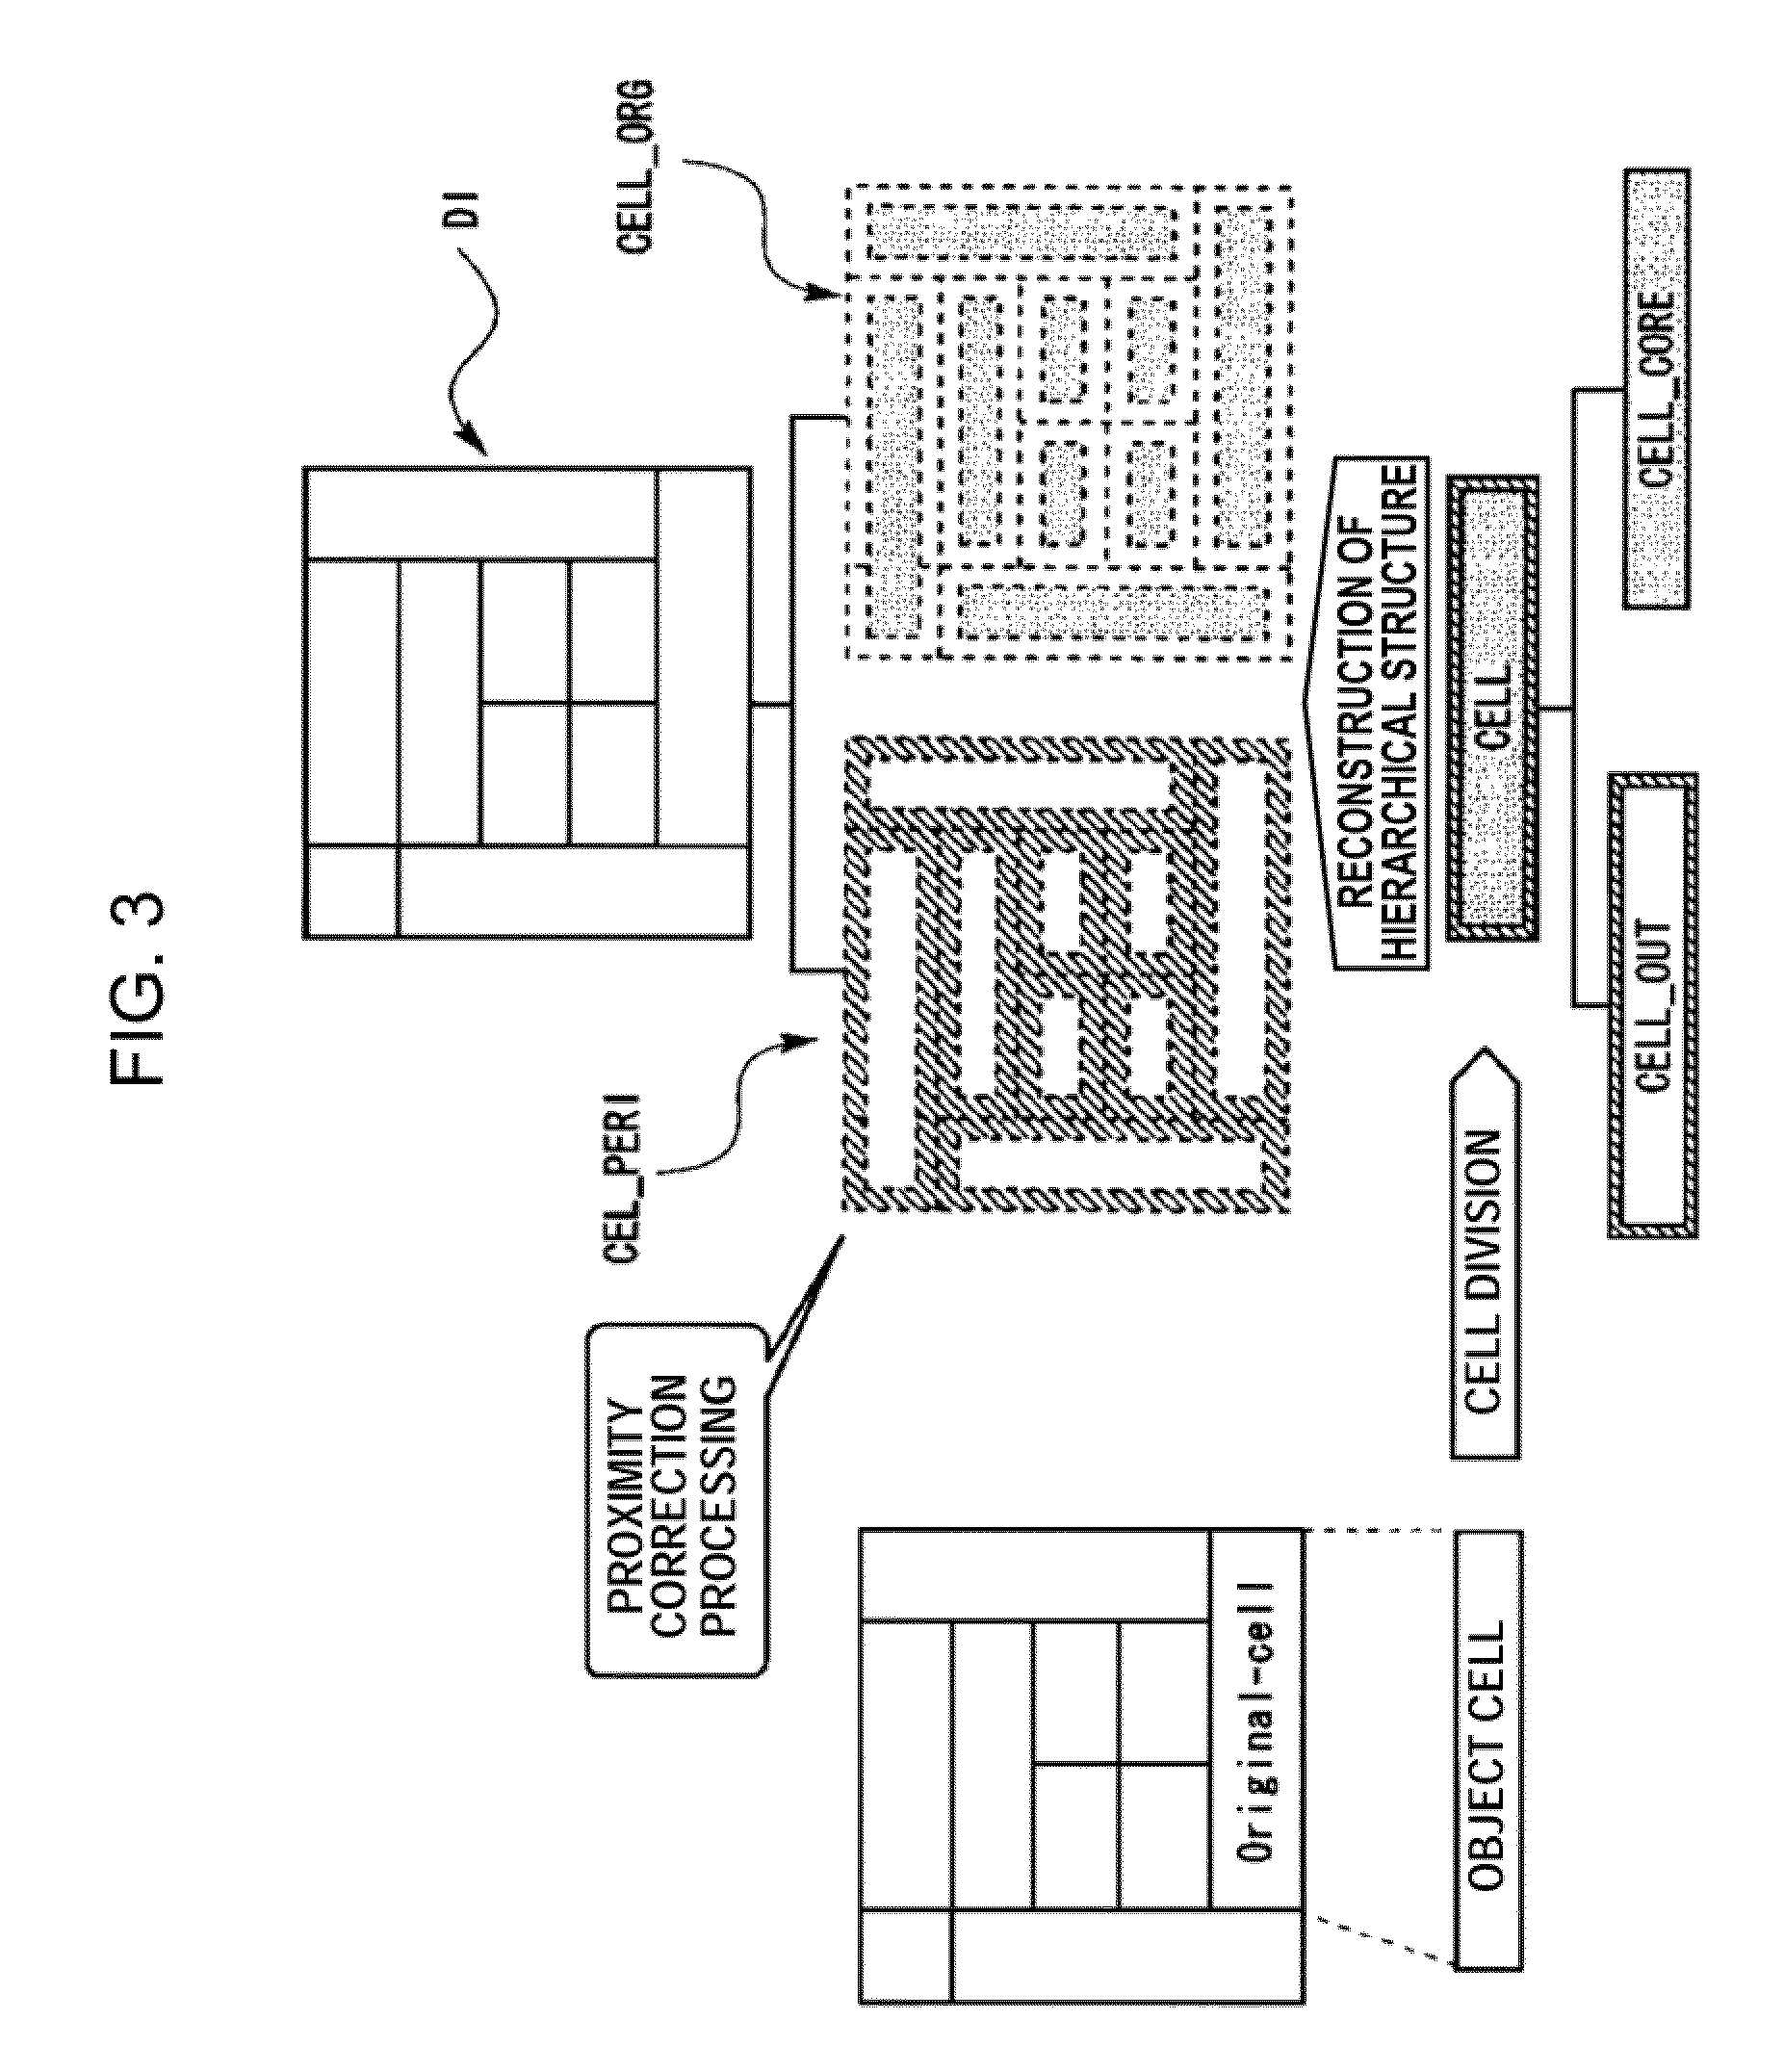 Photomask data processing method, photomask data processing system and manufacturing method